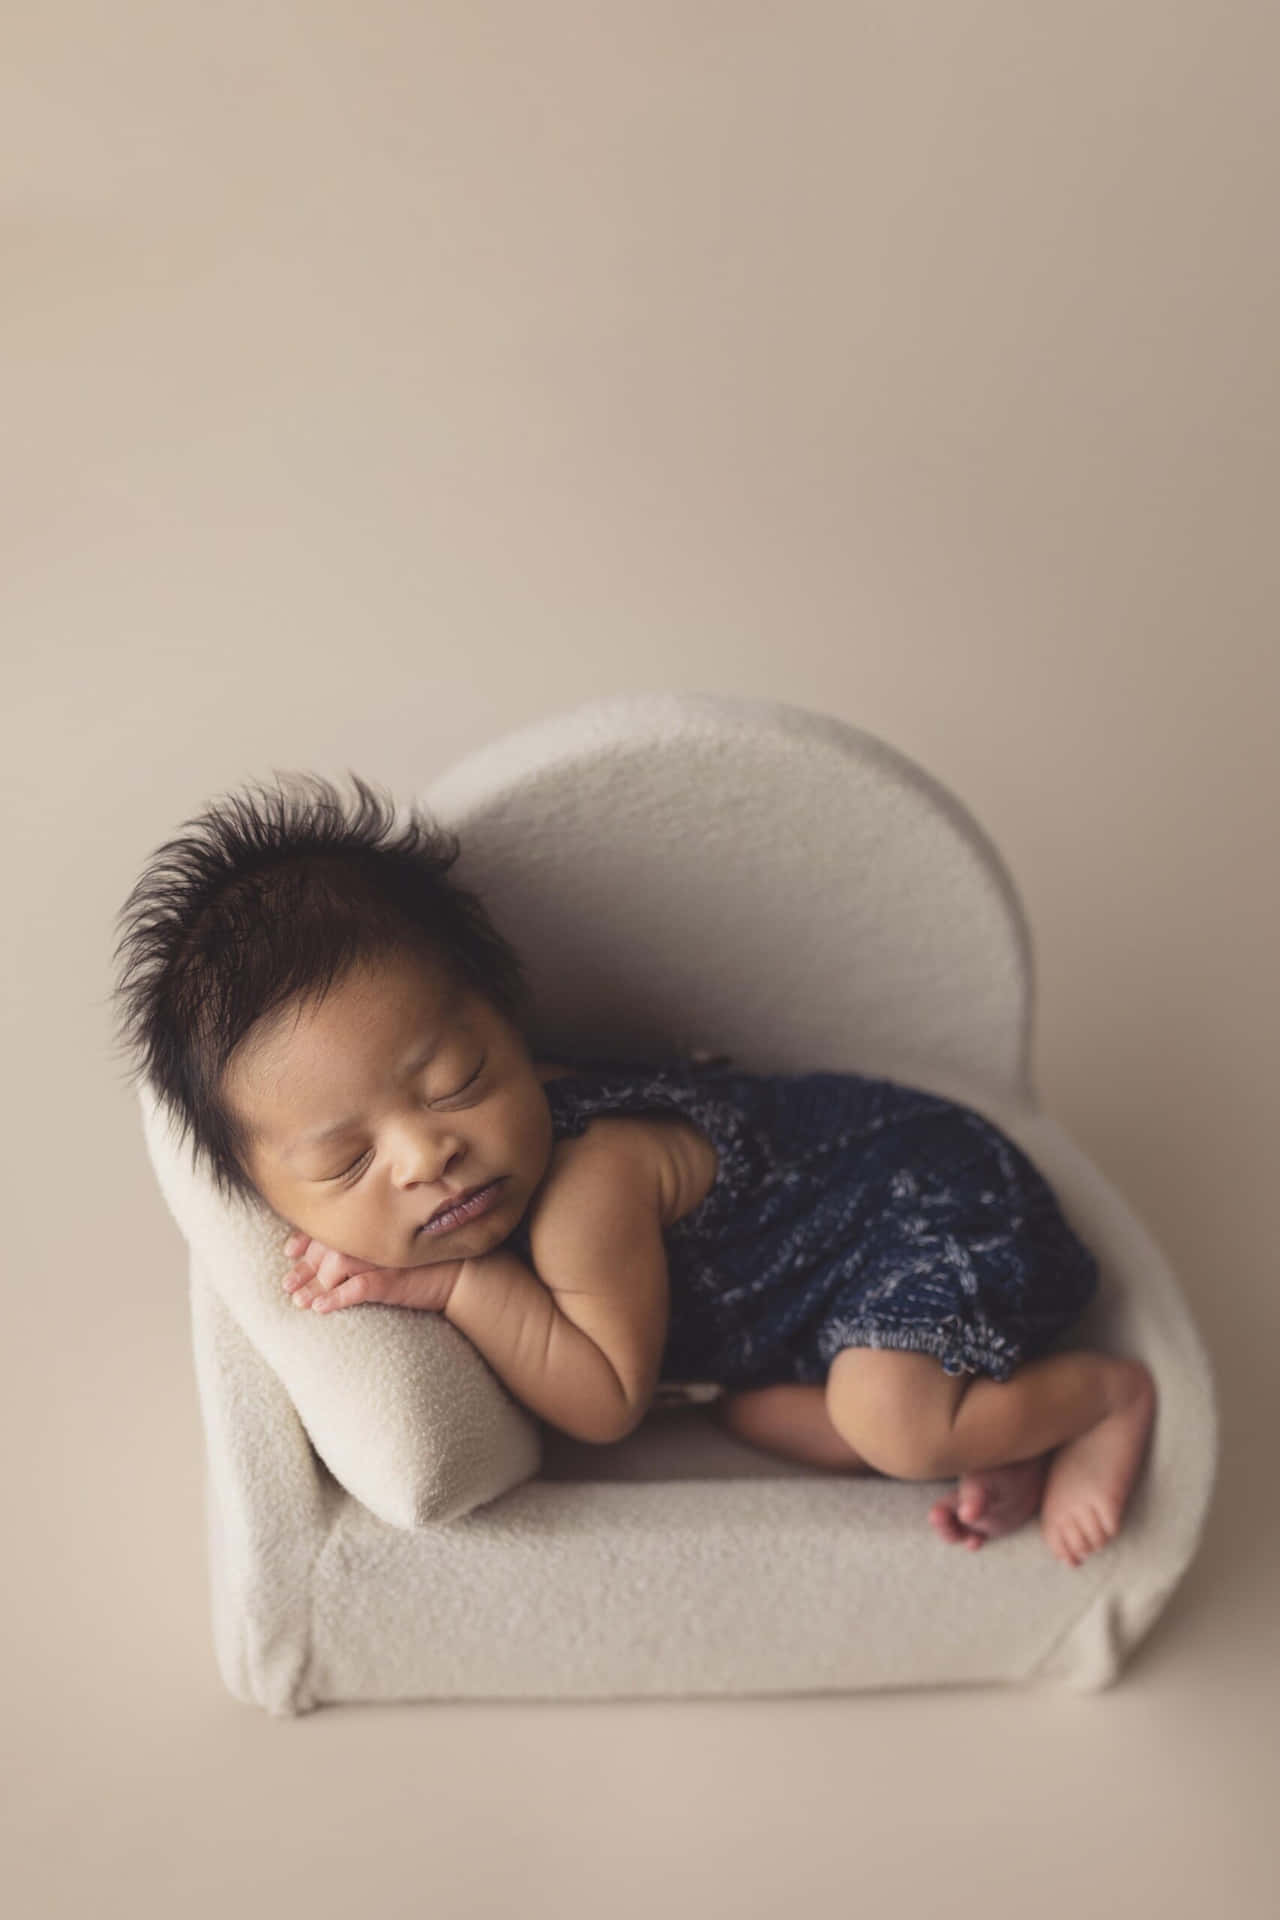 A Baby Sleeping In A White Chair